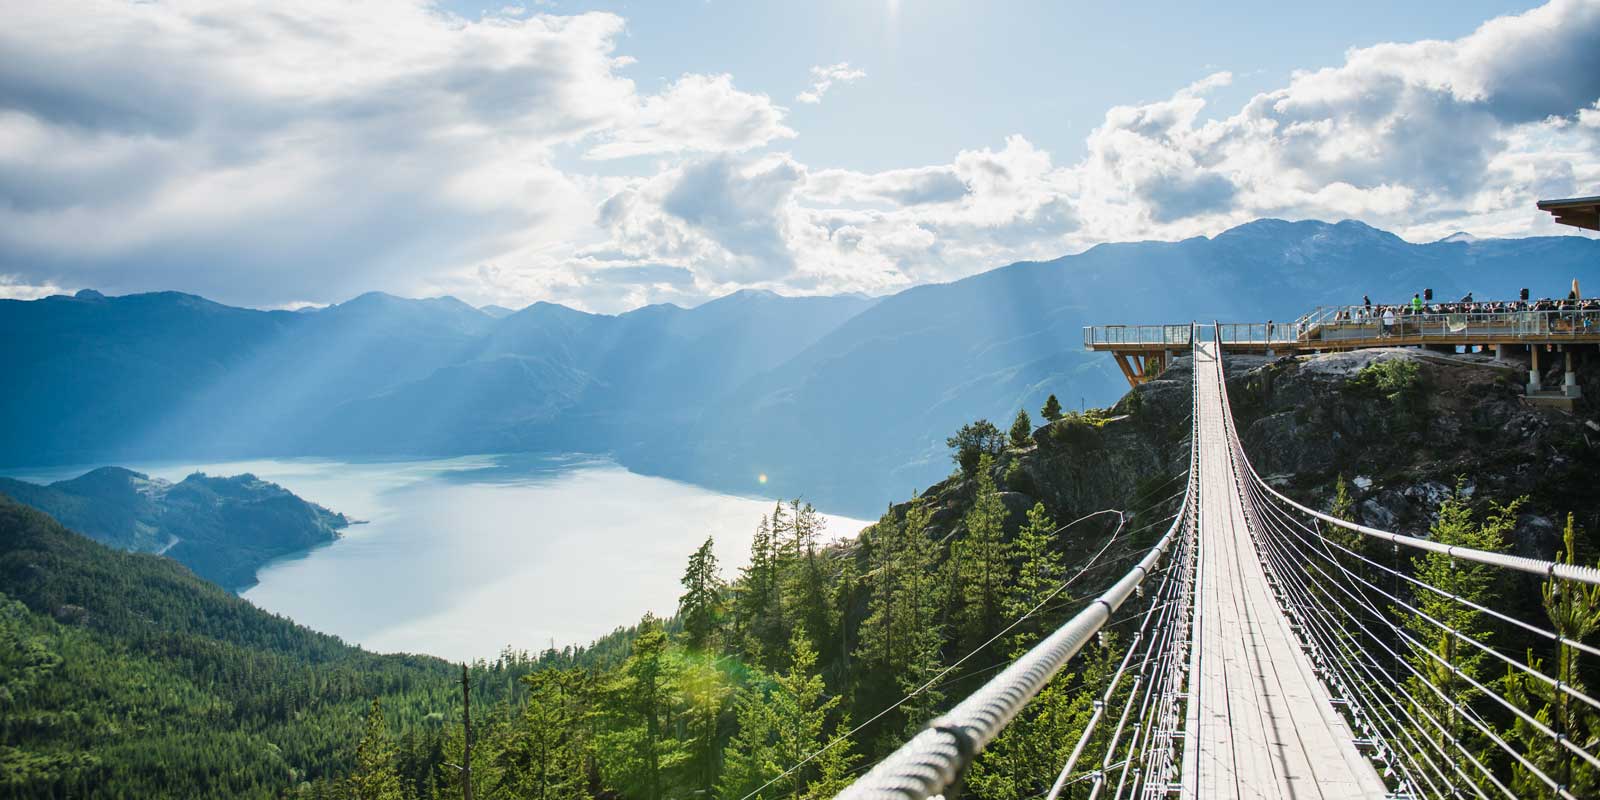 Views from the top of the sea-to-sky gondola, suspension bridge